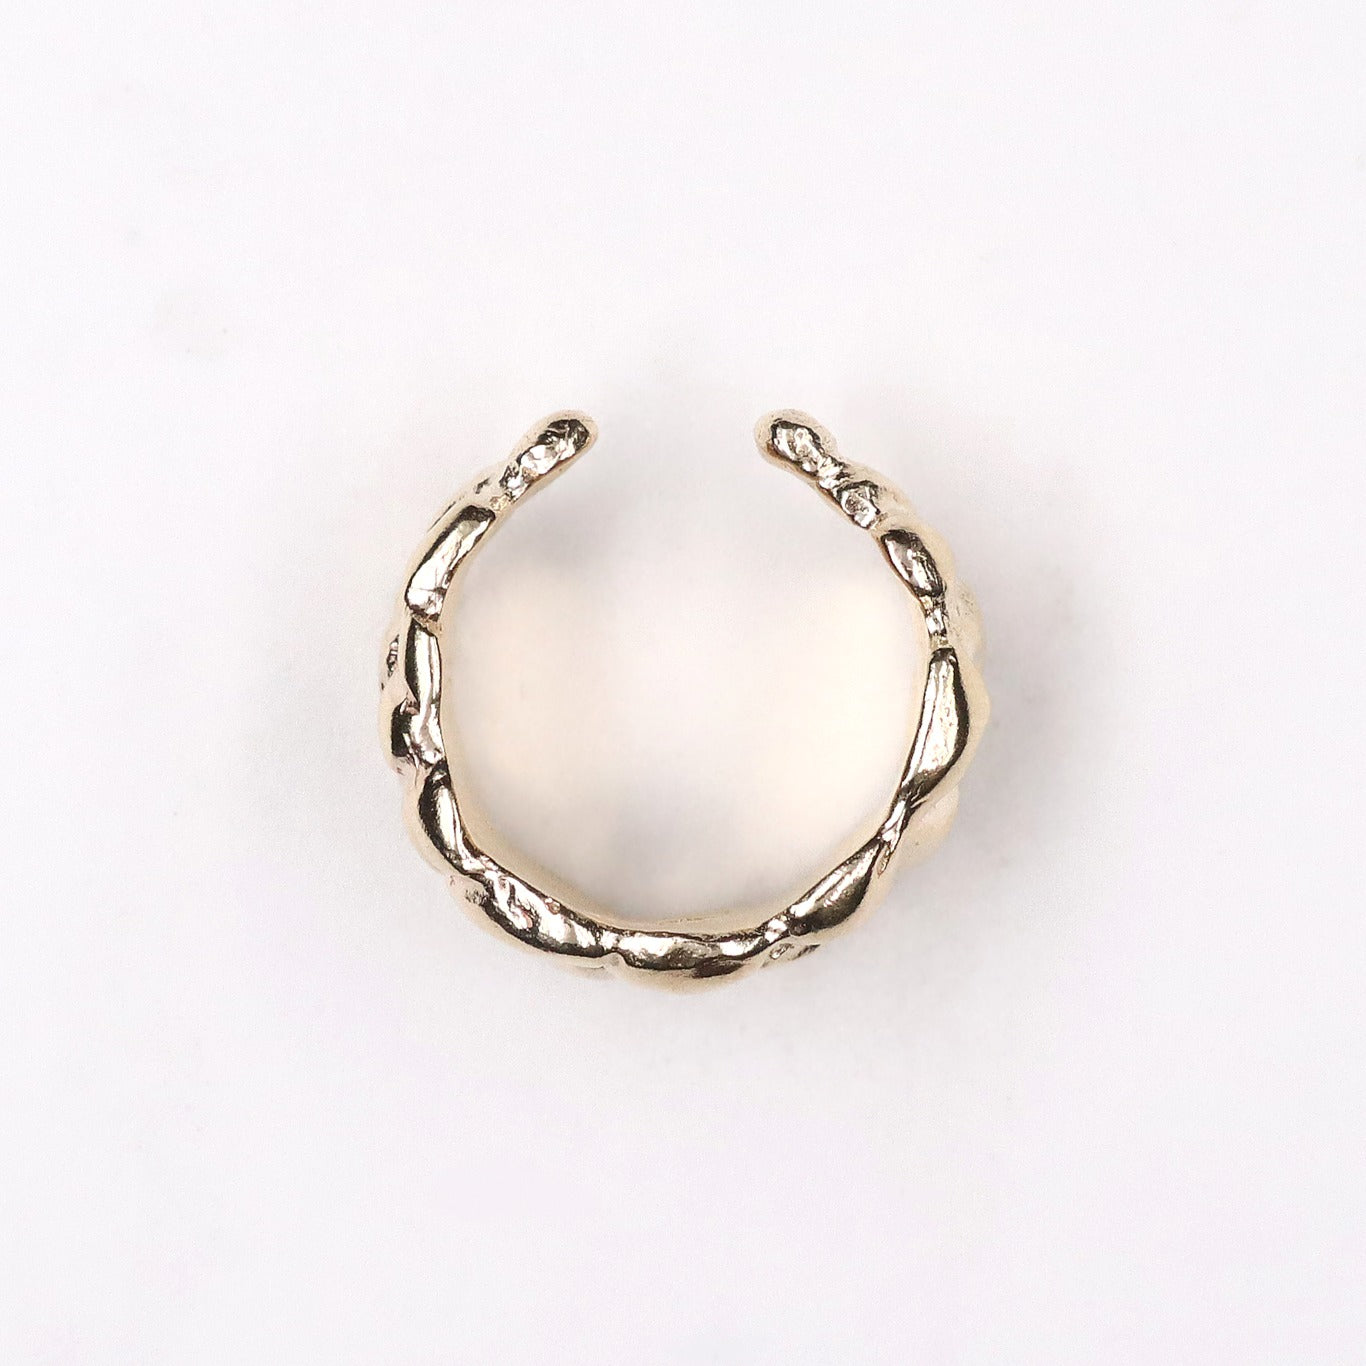 [Made to order] Crossing ear cuff/K10 pink gold